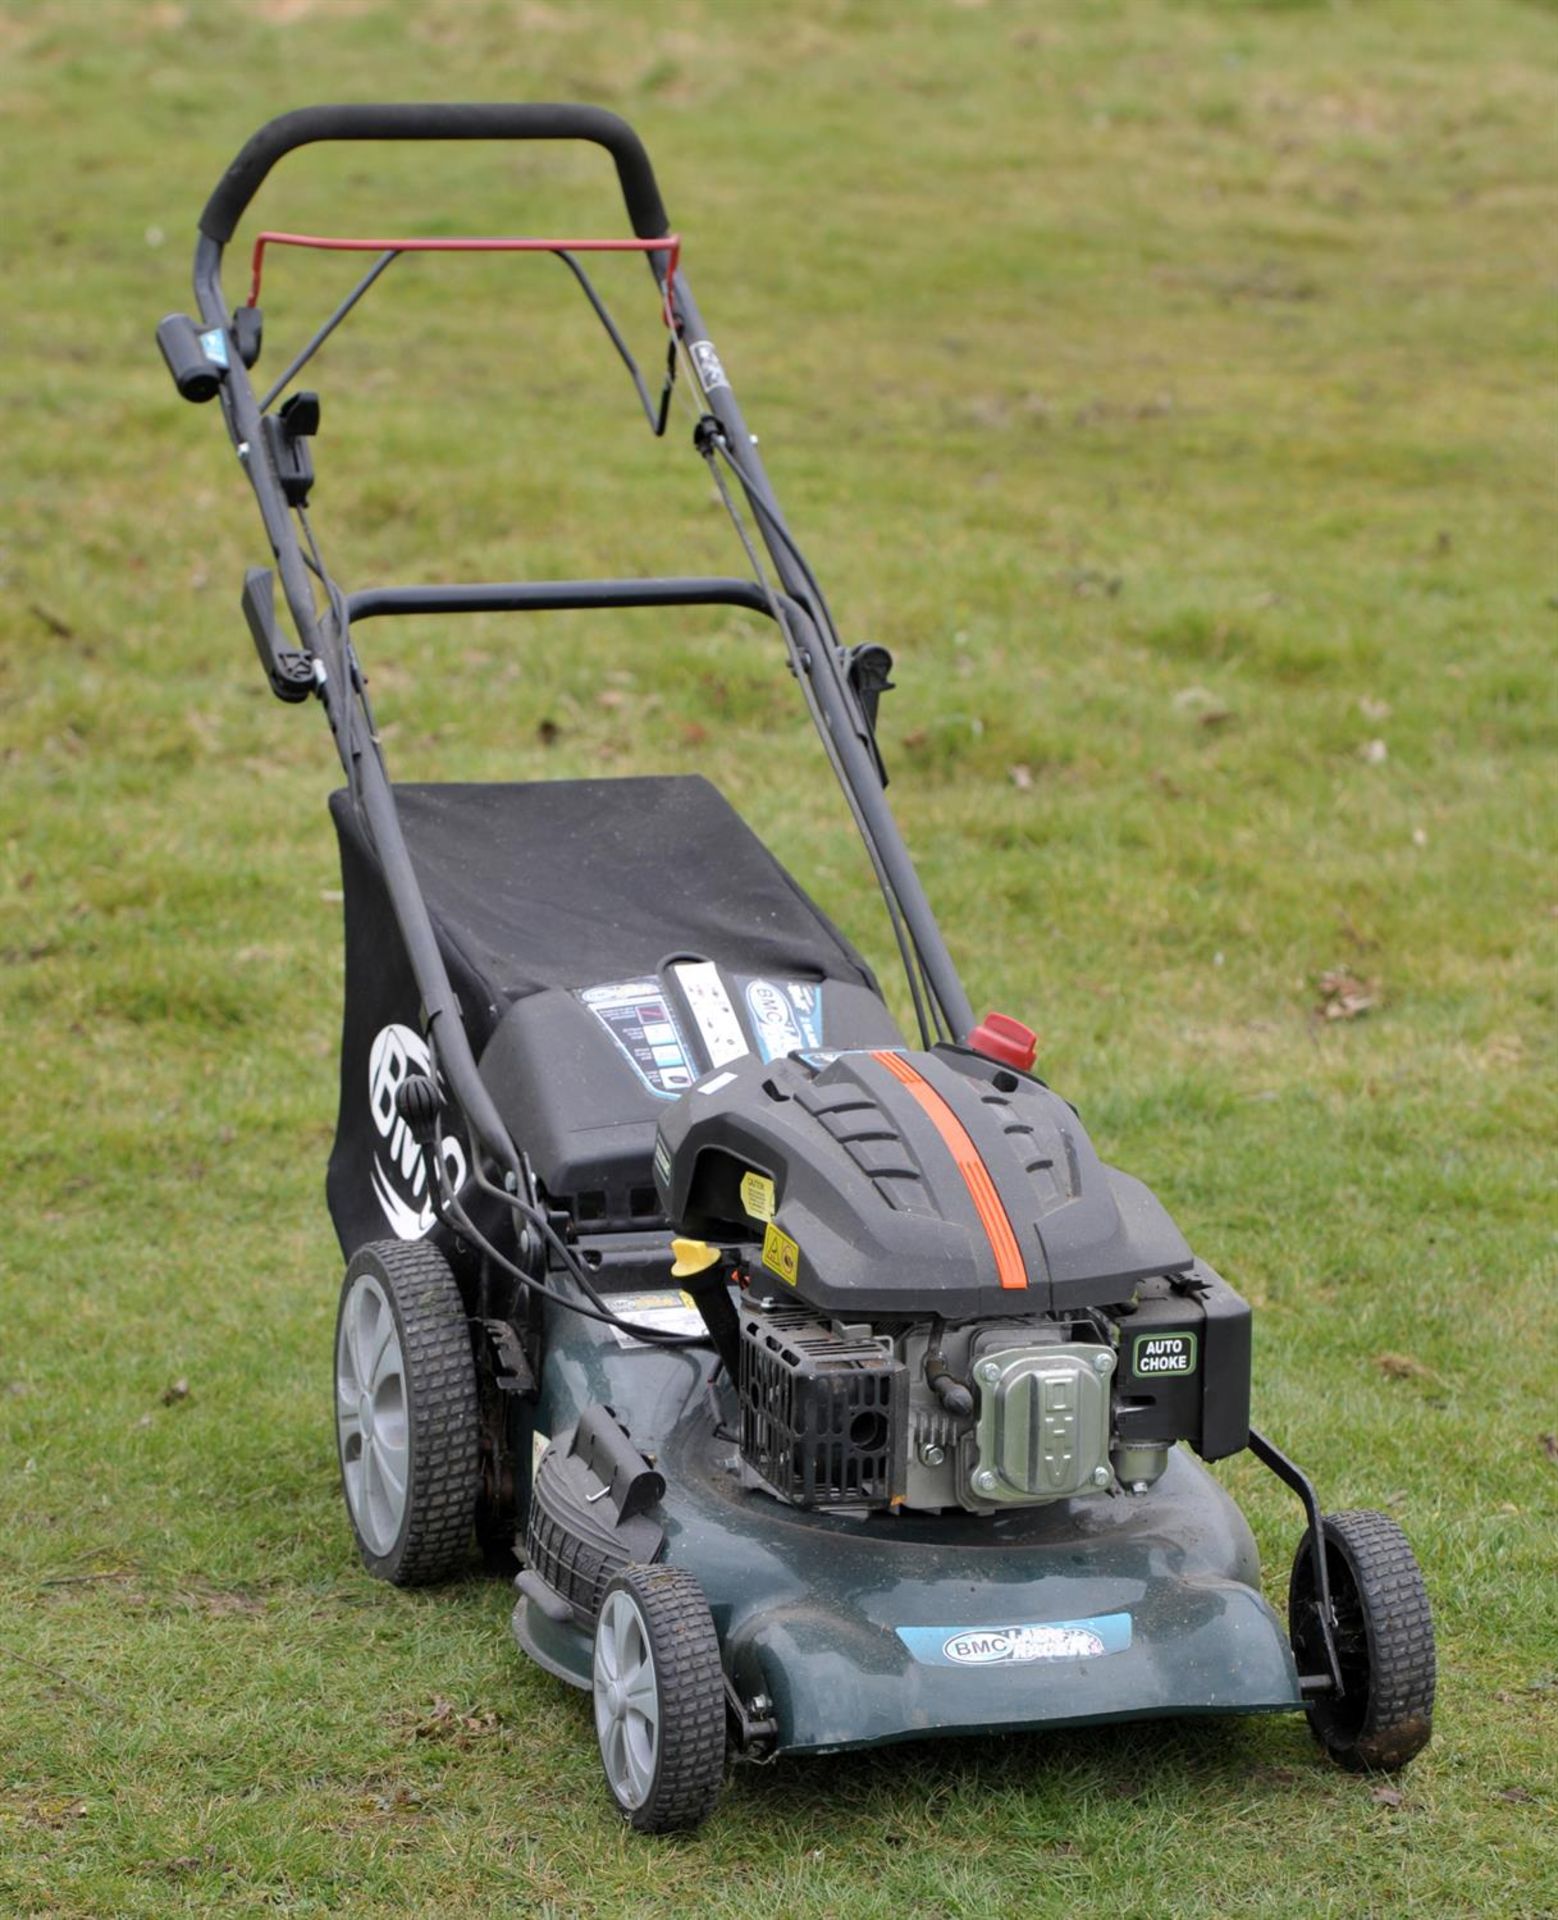 Wolf 5.5 HP Engine, two blade Lawn Racer Mower. PLEASE NOTE BUYERS PREMIUM AT THE STANDARD IN - Image 3 of 9